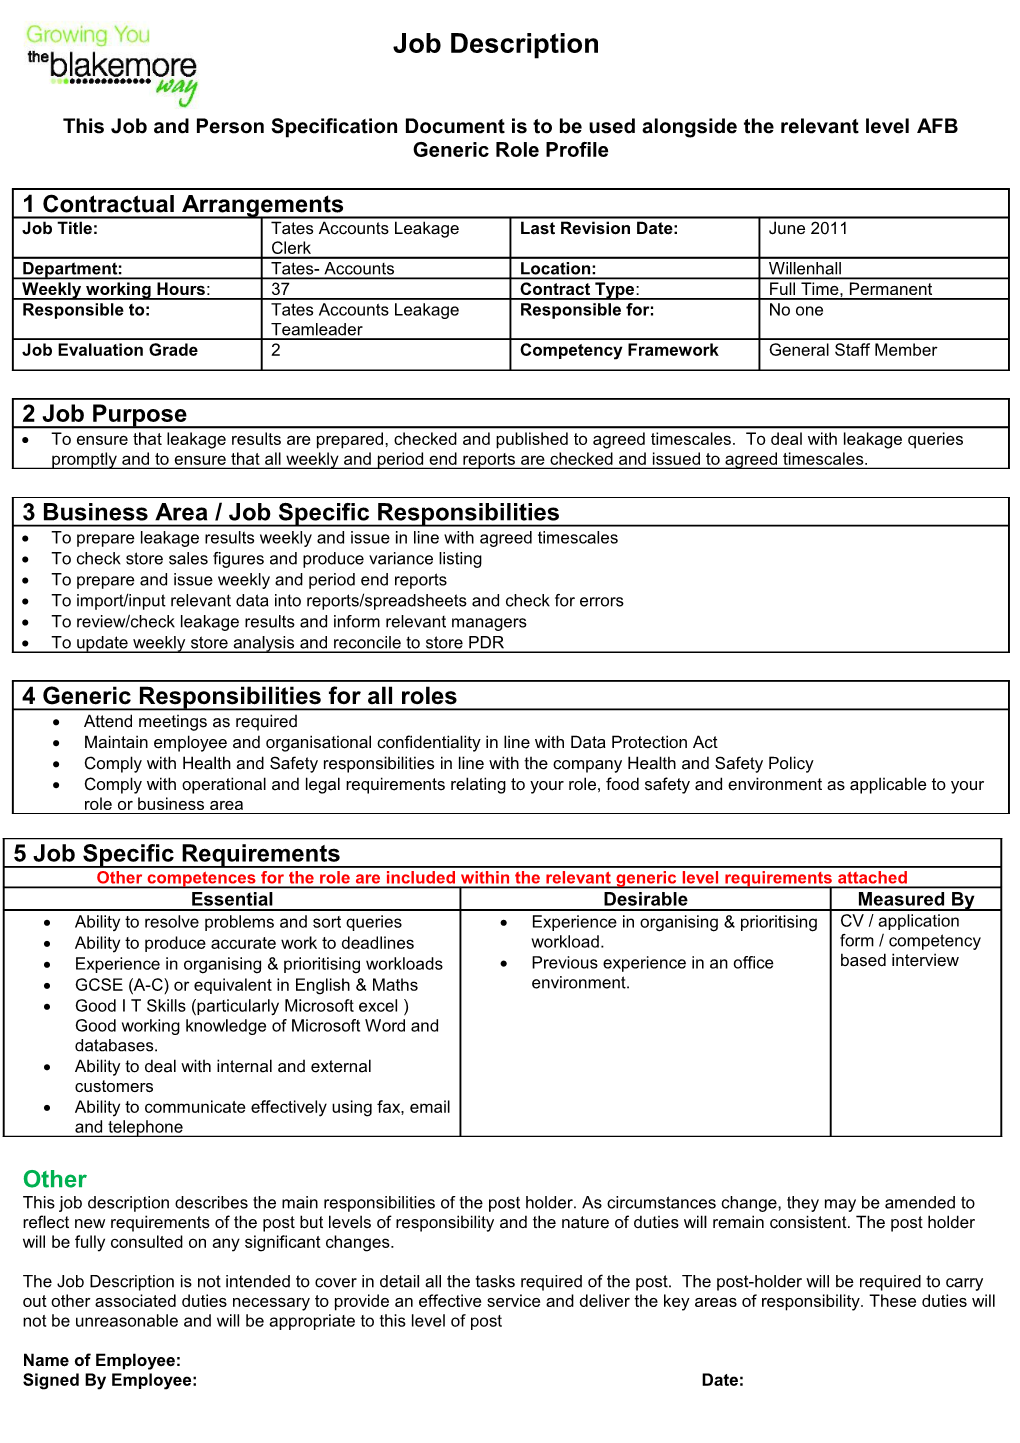 This Job and Person Specification Document Is to Be Used Alongside the Relevant Level